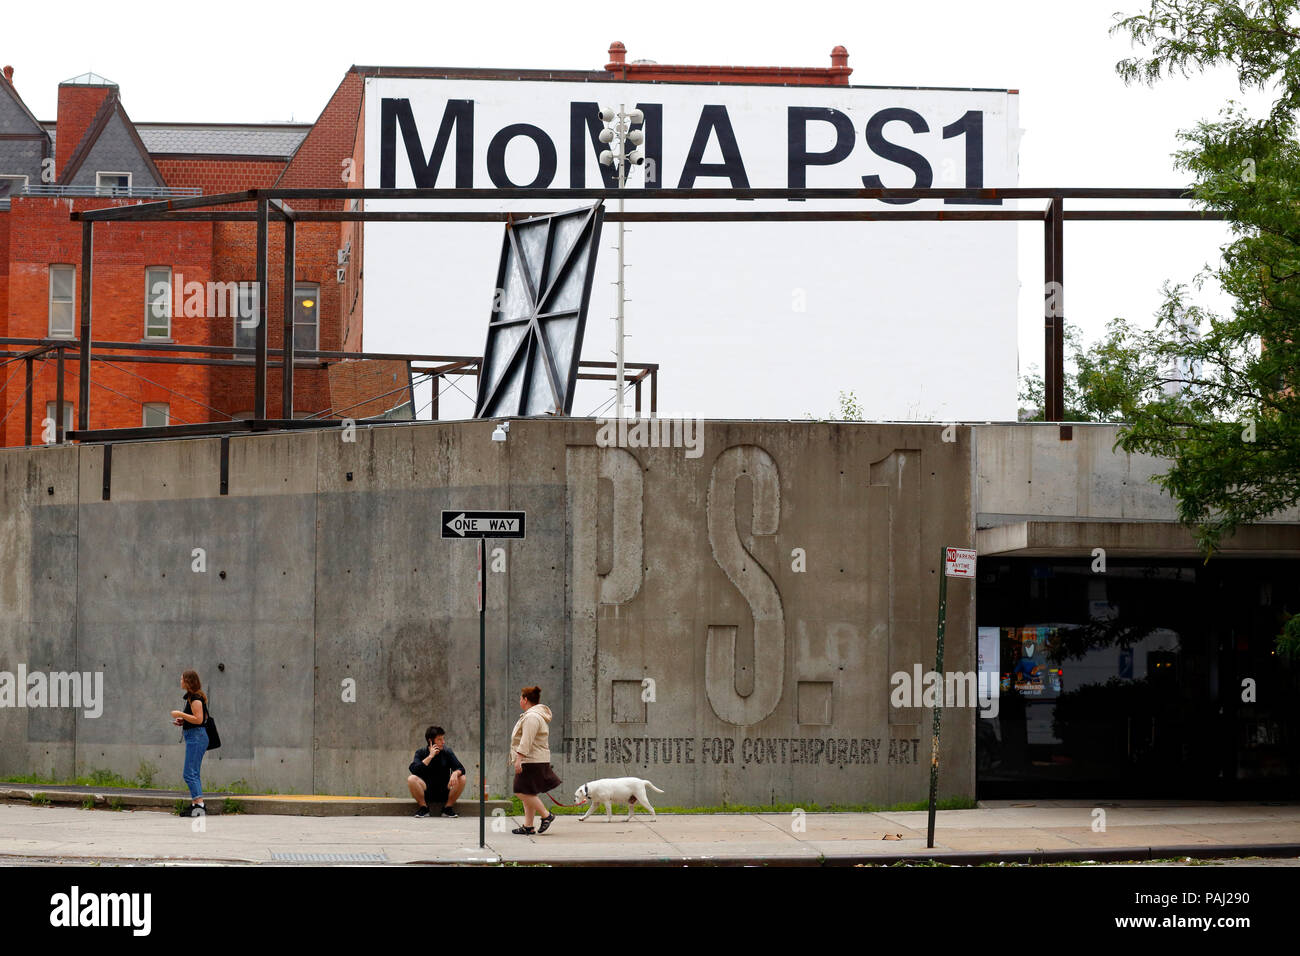 MoMA PS1, 22-25 Jackson Ave, Queens, NY. exterior of a contemporary art museum in the Long Island City neighborhood. Stock Photo